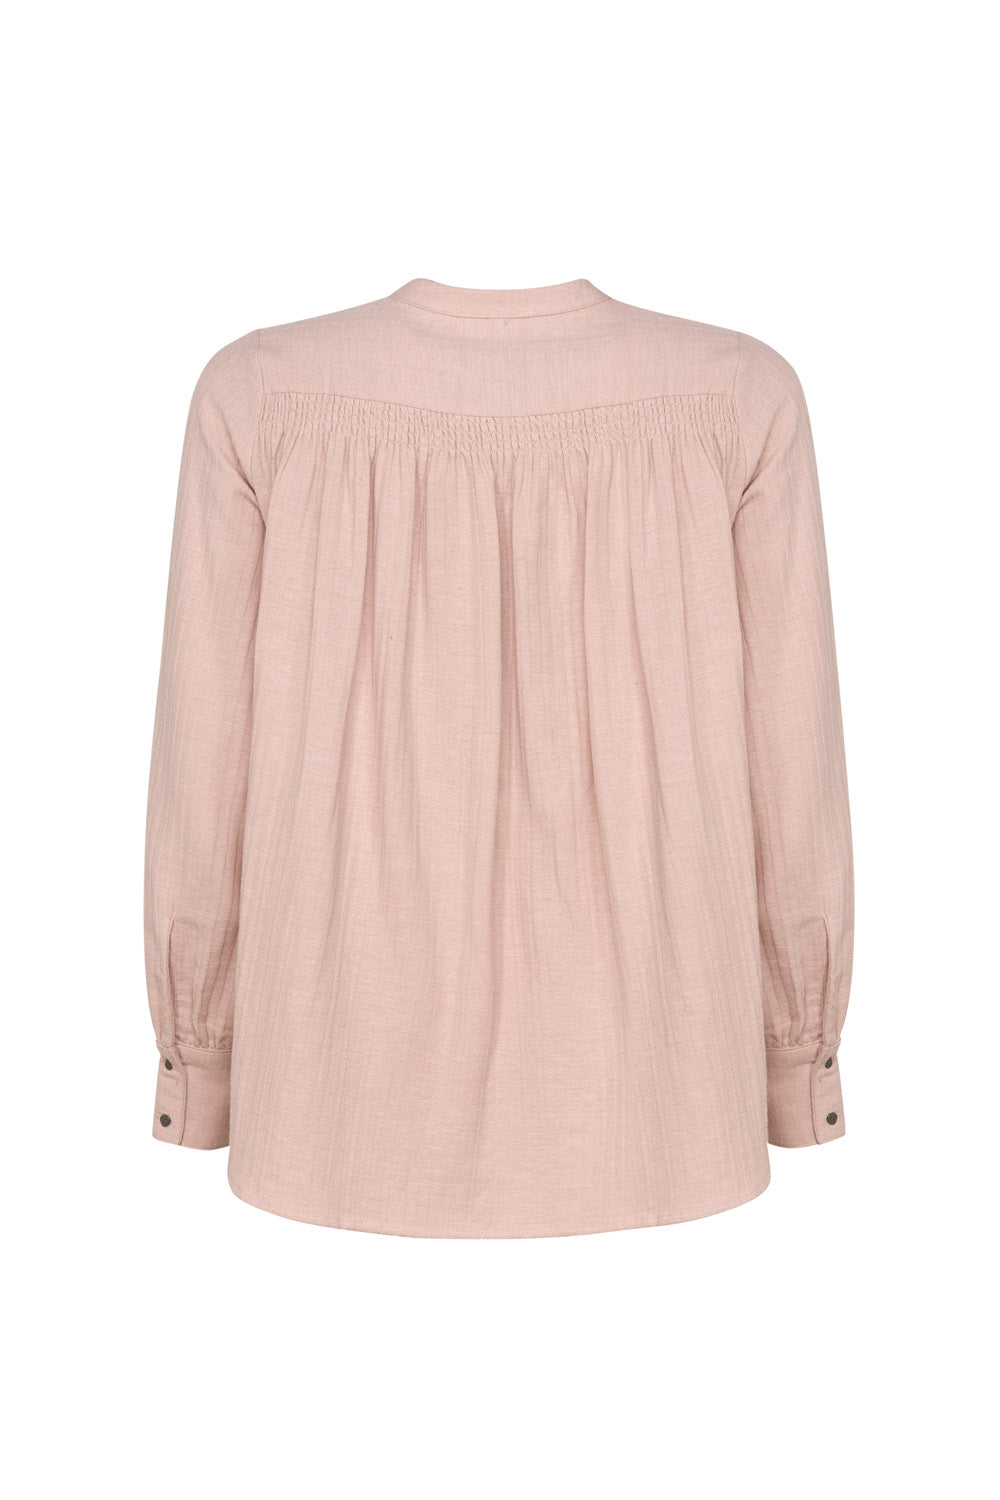 MADLY SWEETLY COTTON TALE SHIRT - BLUSH - THE VOGUE STORE